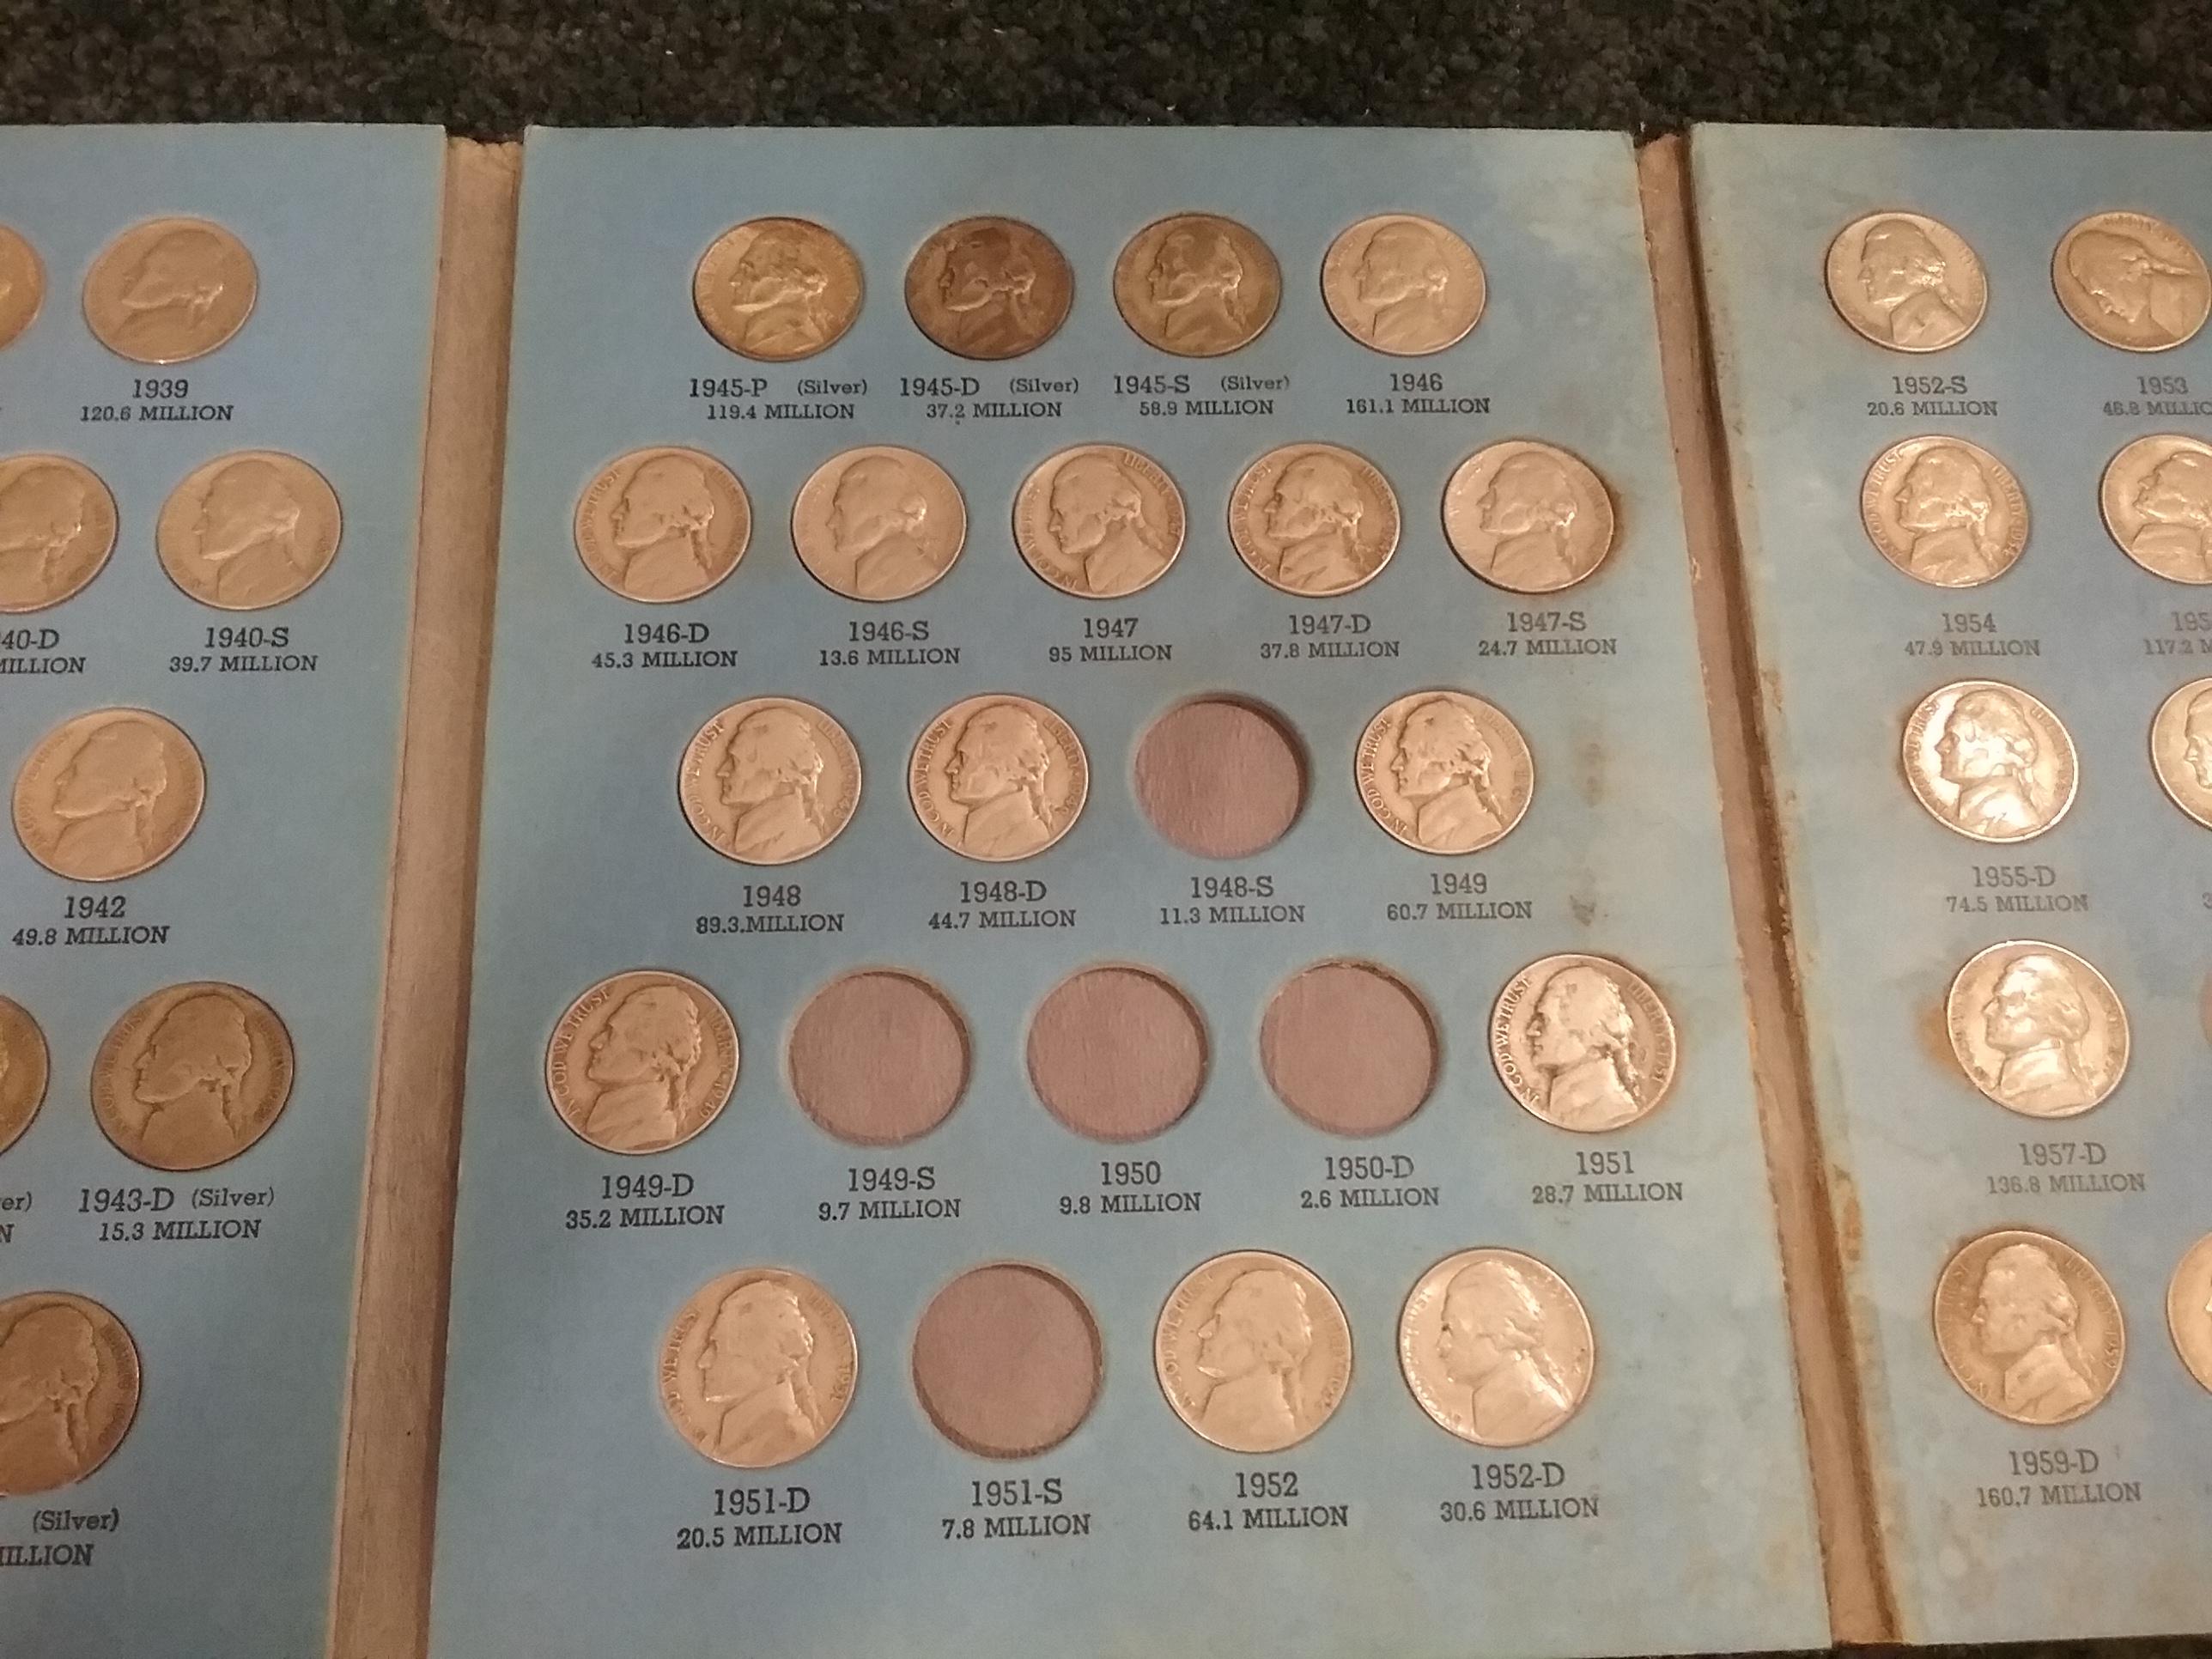 Jefferson Nickel Book..nearly full with all 11 Silvers